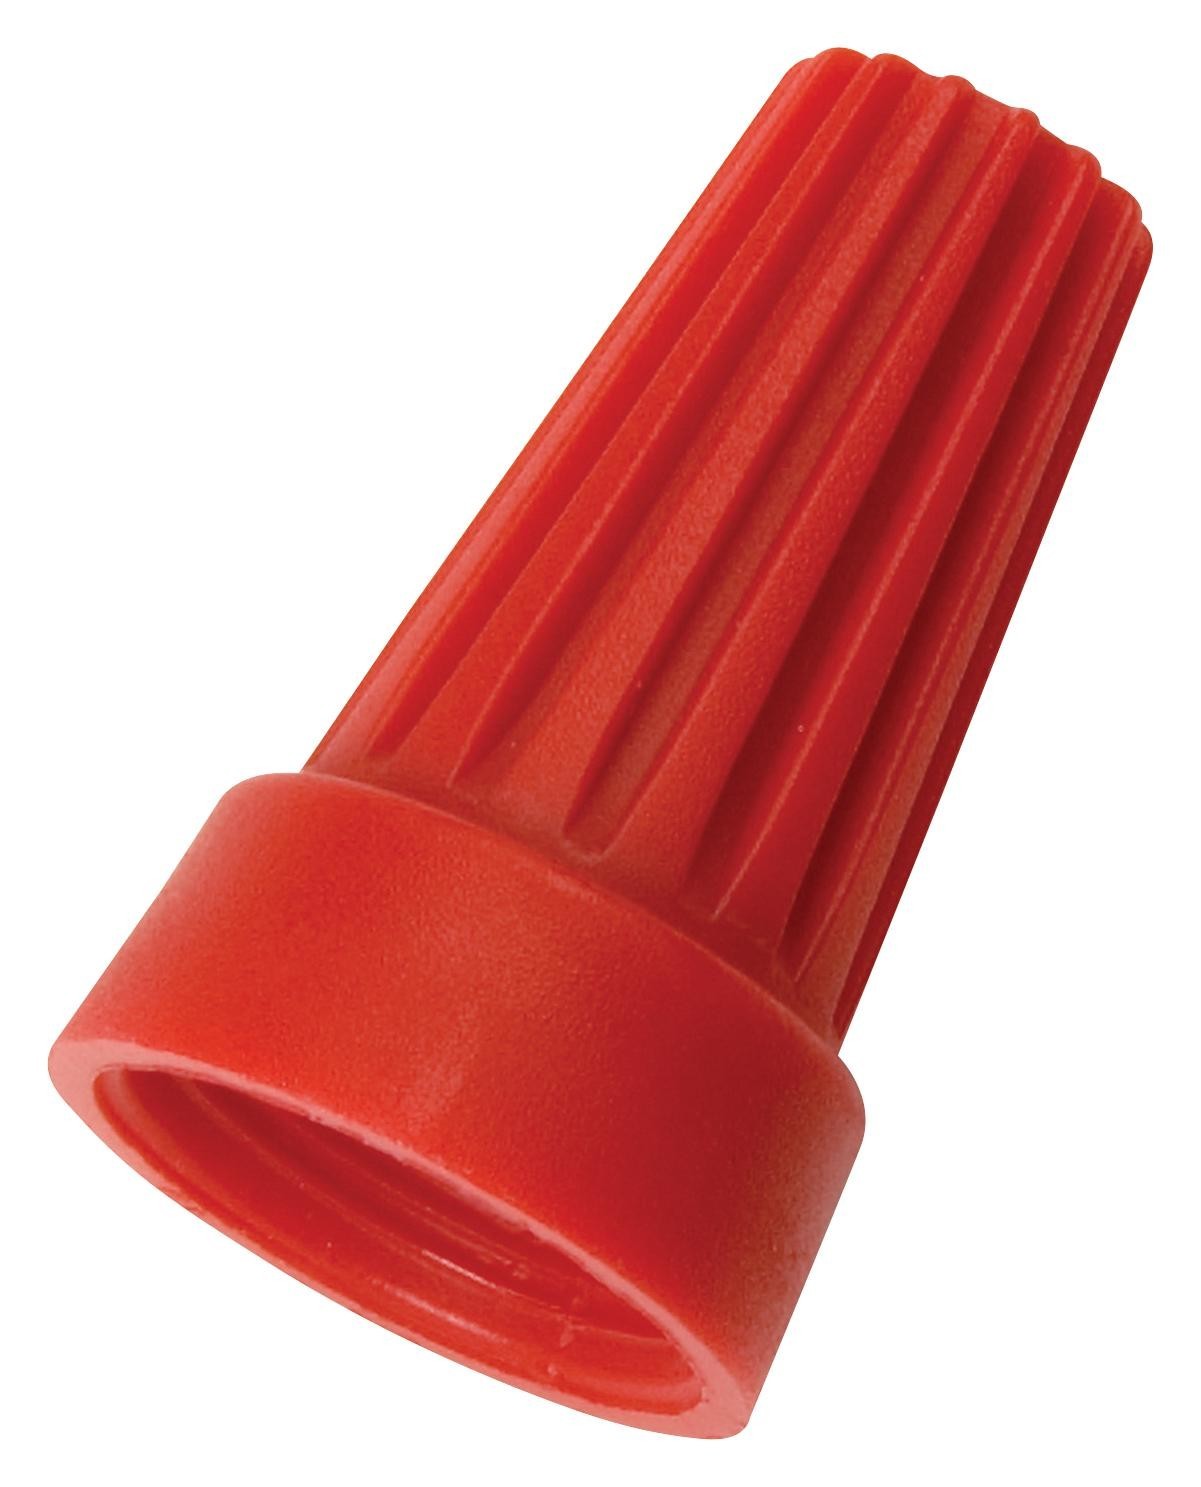 Ideal Wt6-B Terminal, Connector, Twist On, Red, 20-8Awg